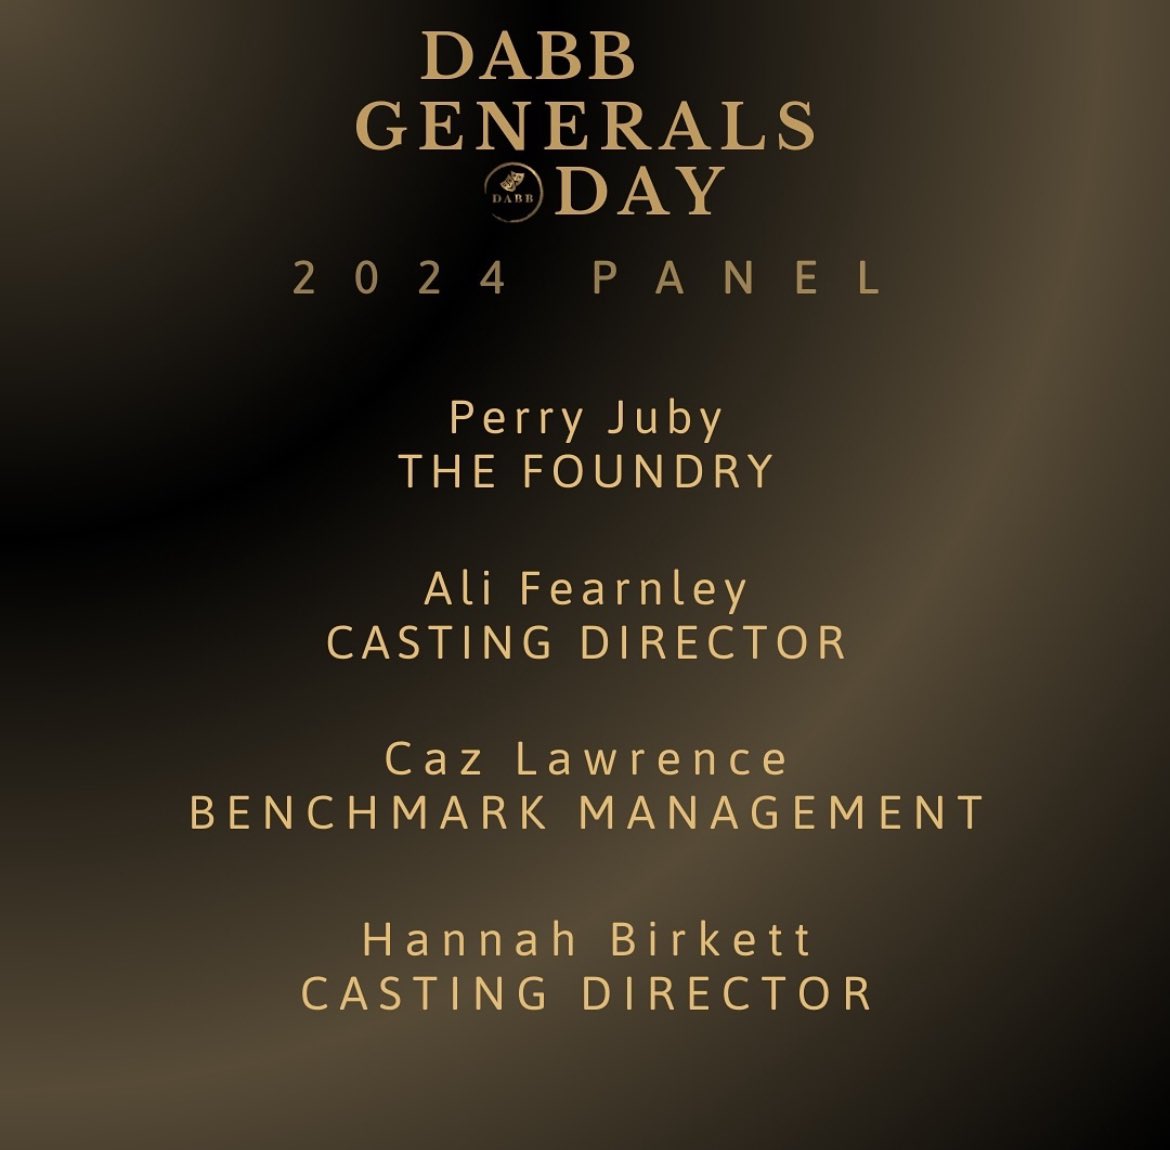 Here’s your sixteenth look at our wonderful panel for this years DABB Generals Day 2024! Thank you! @perryjuby | @Ali_Fearnley | @Benchmark_Mgmt